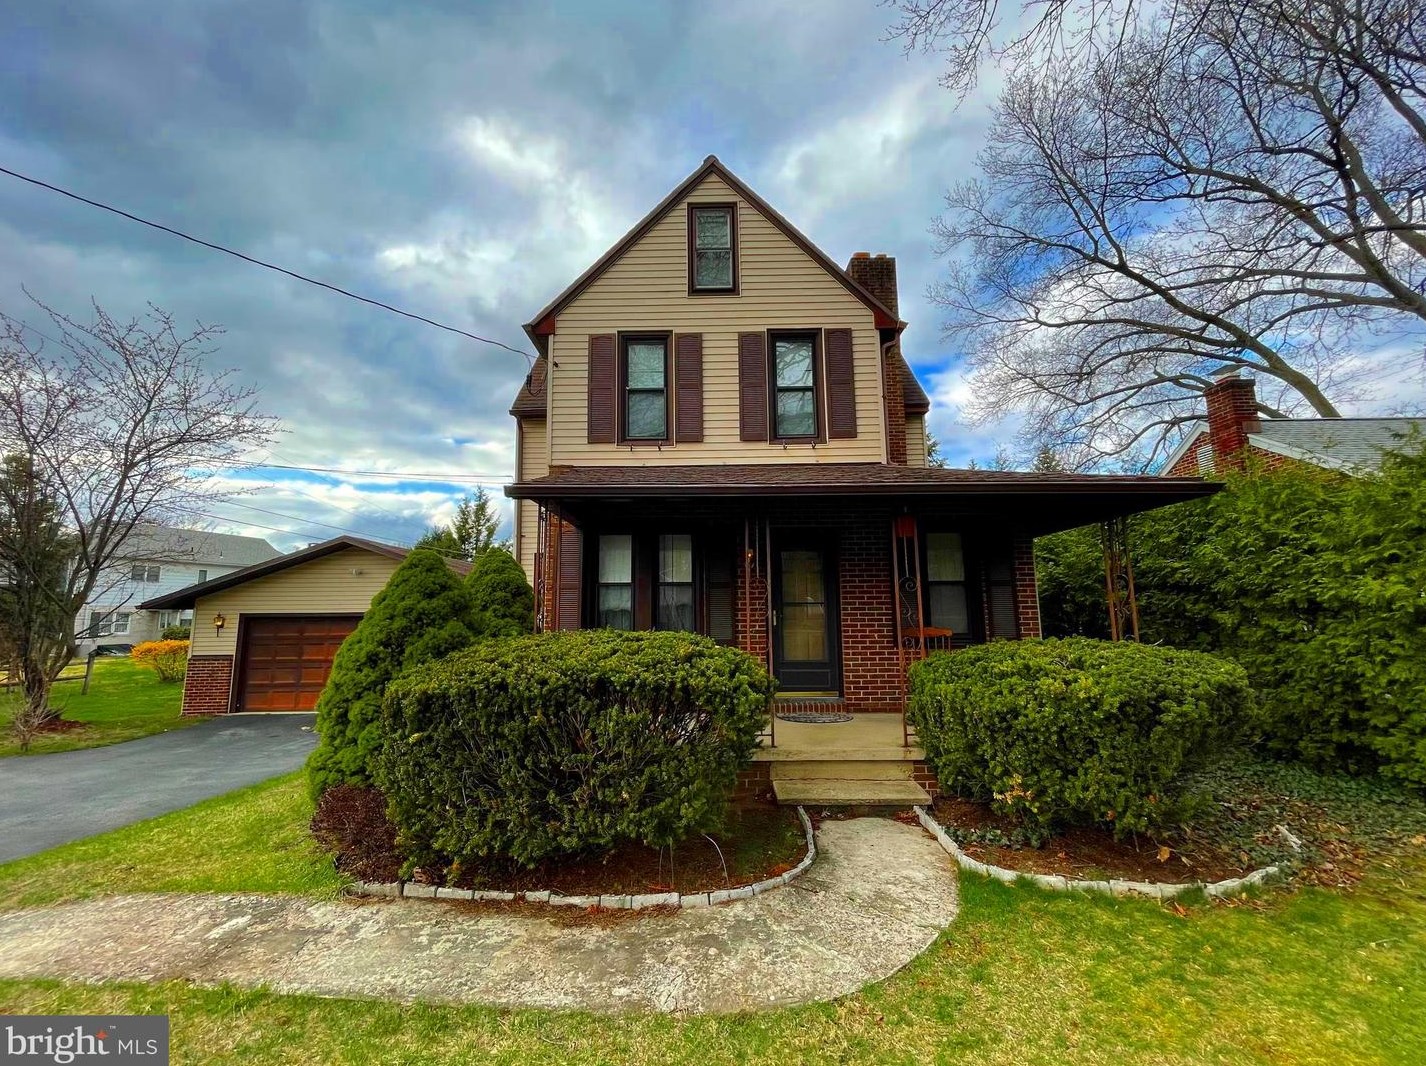 305 Mckinley Ave, Reading, PA 19605